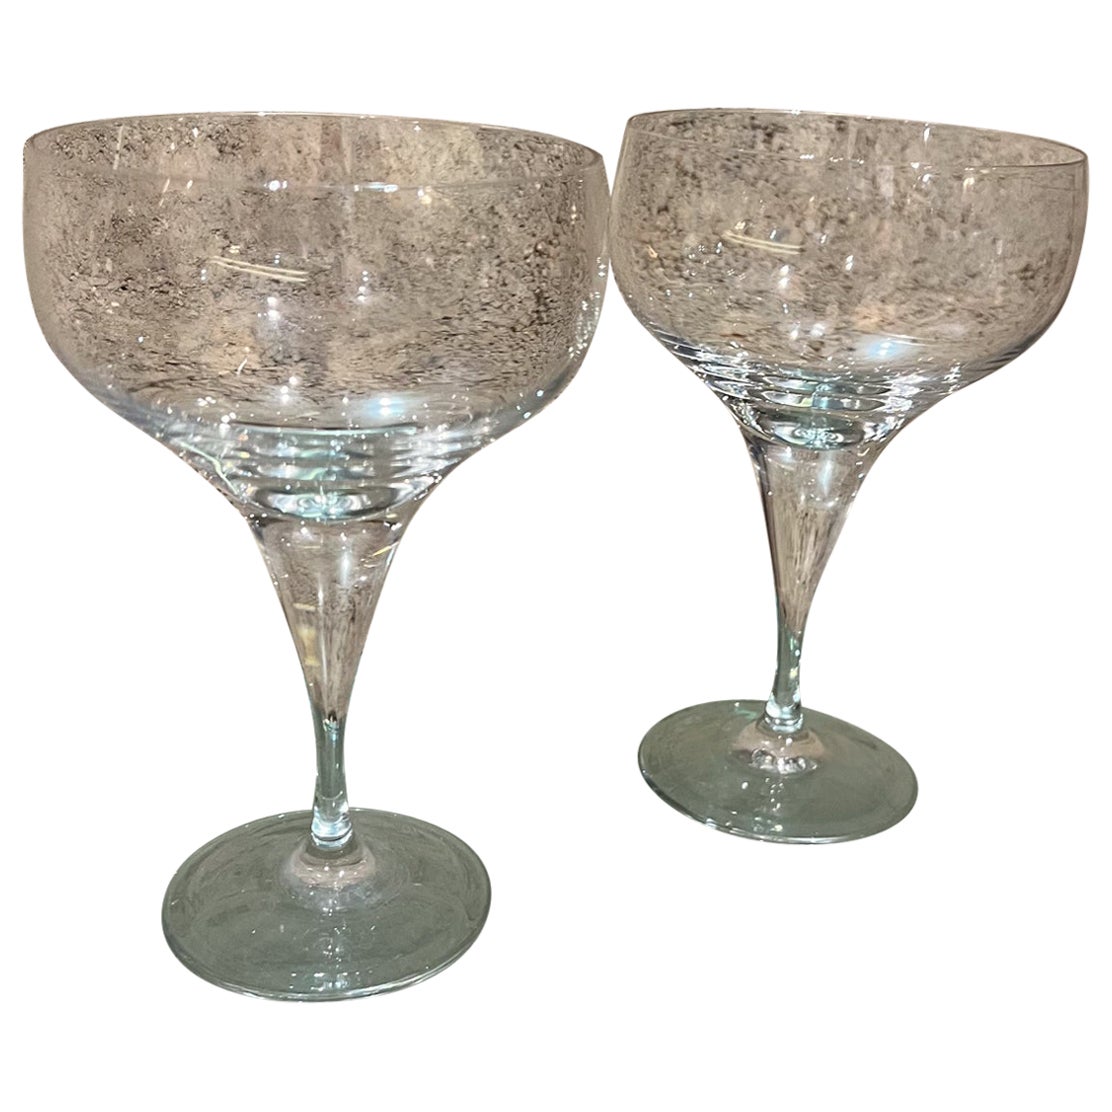 1980 Rosenthal Crystal Champagne Glasses Coupe Bjorn Wiinblad